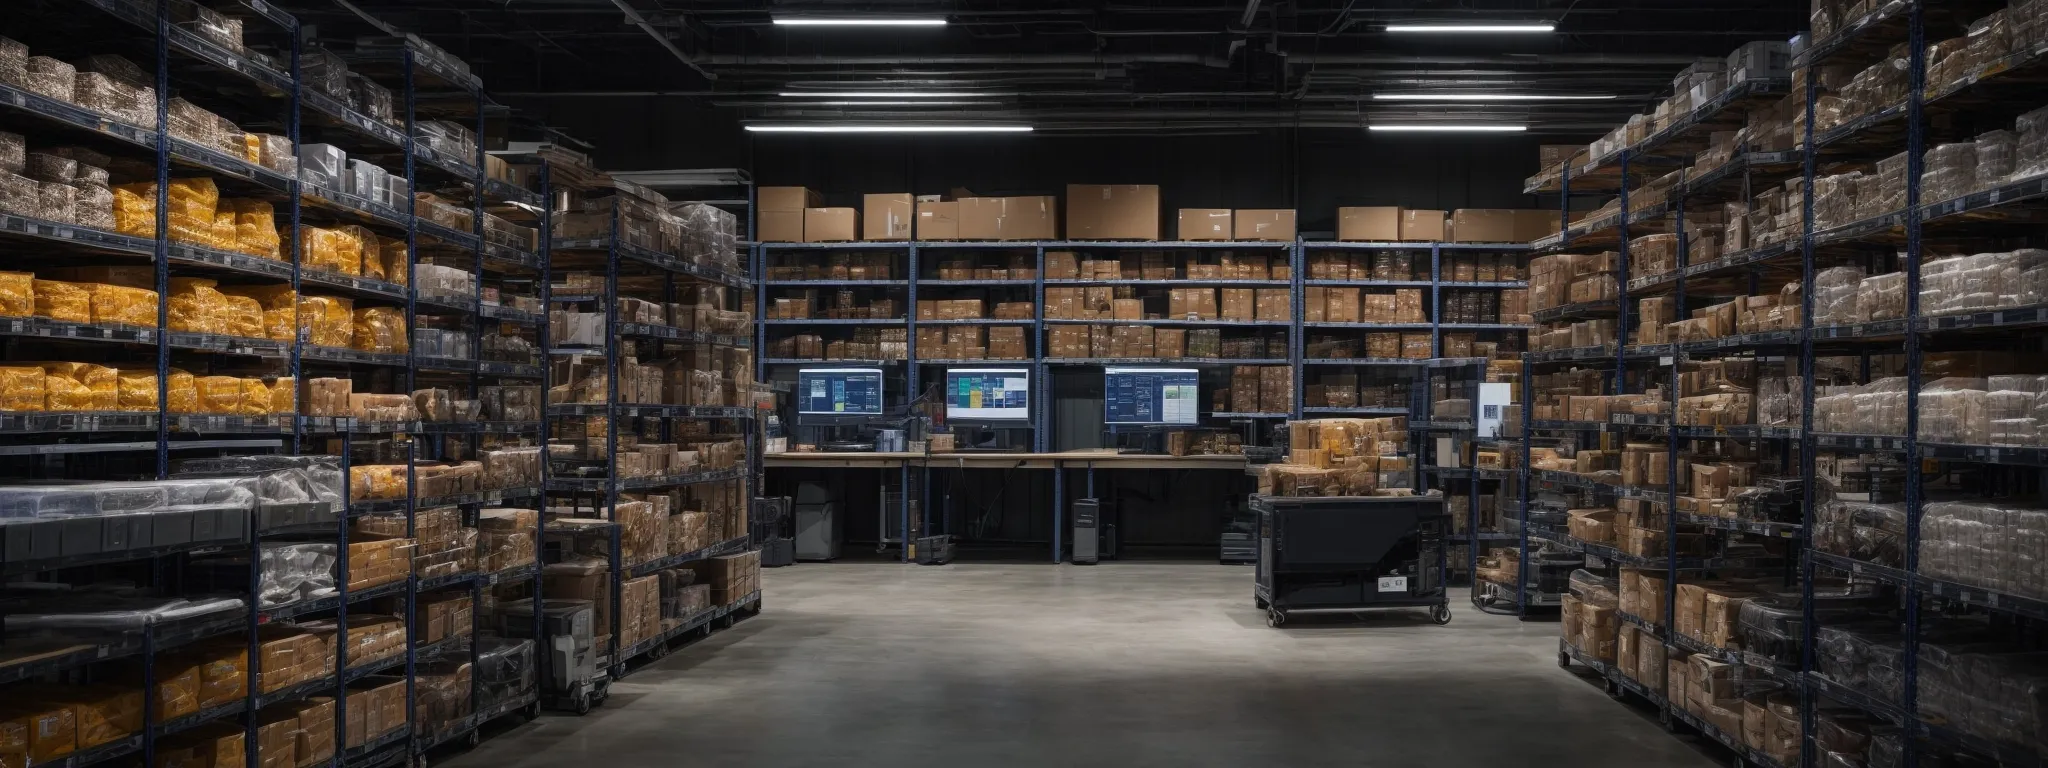 a modern warehouse with rows of shelves filled with products and a central computer monitoring station displaying graphs and sales data.